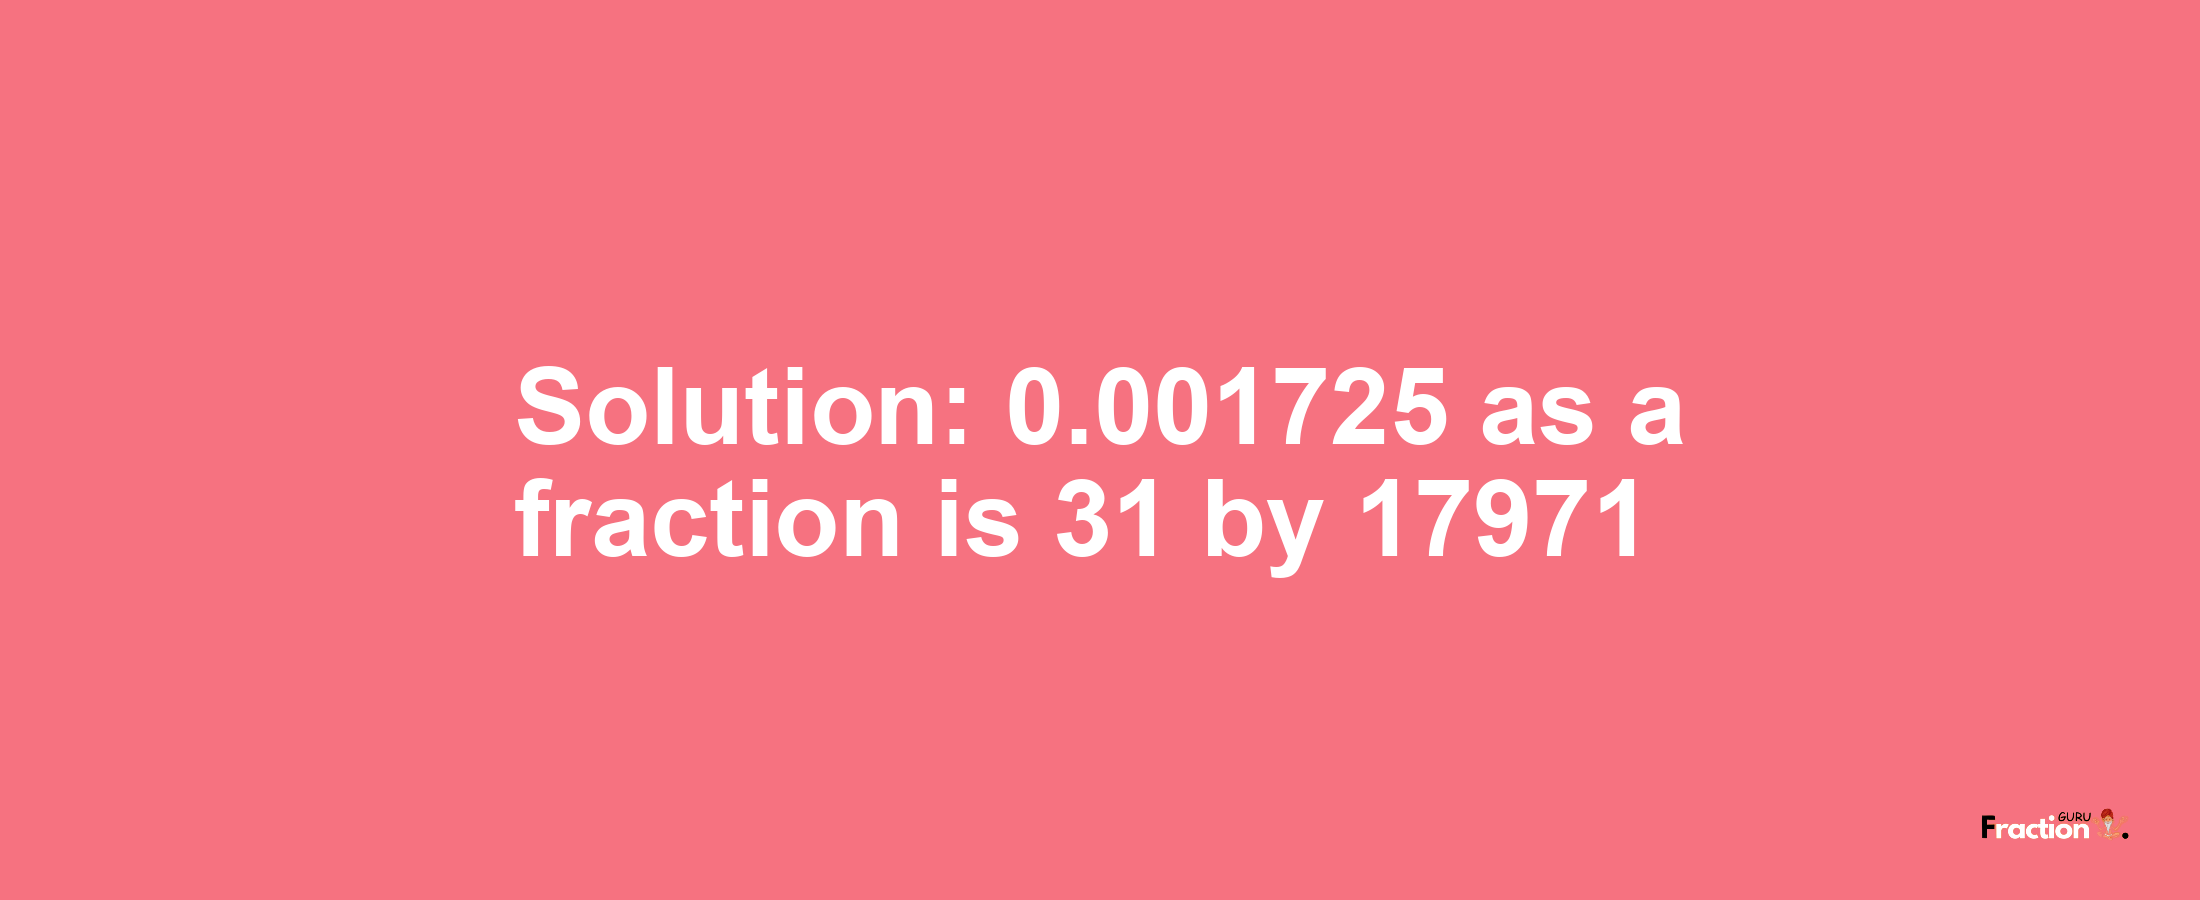 Solution:0.001725 as a fraction is 31/17971